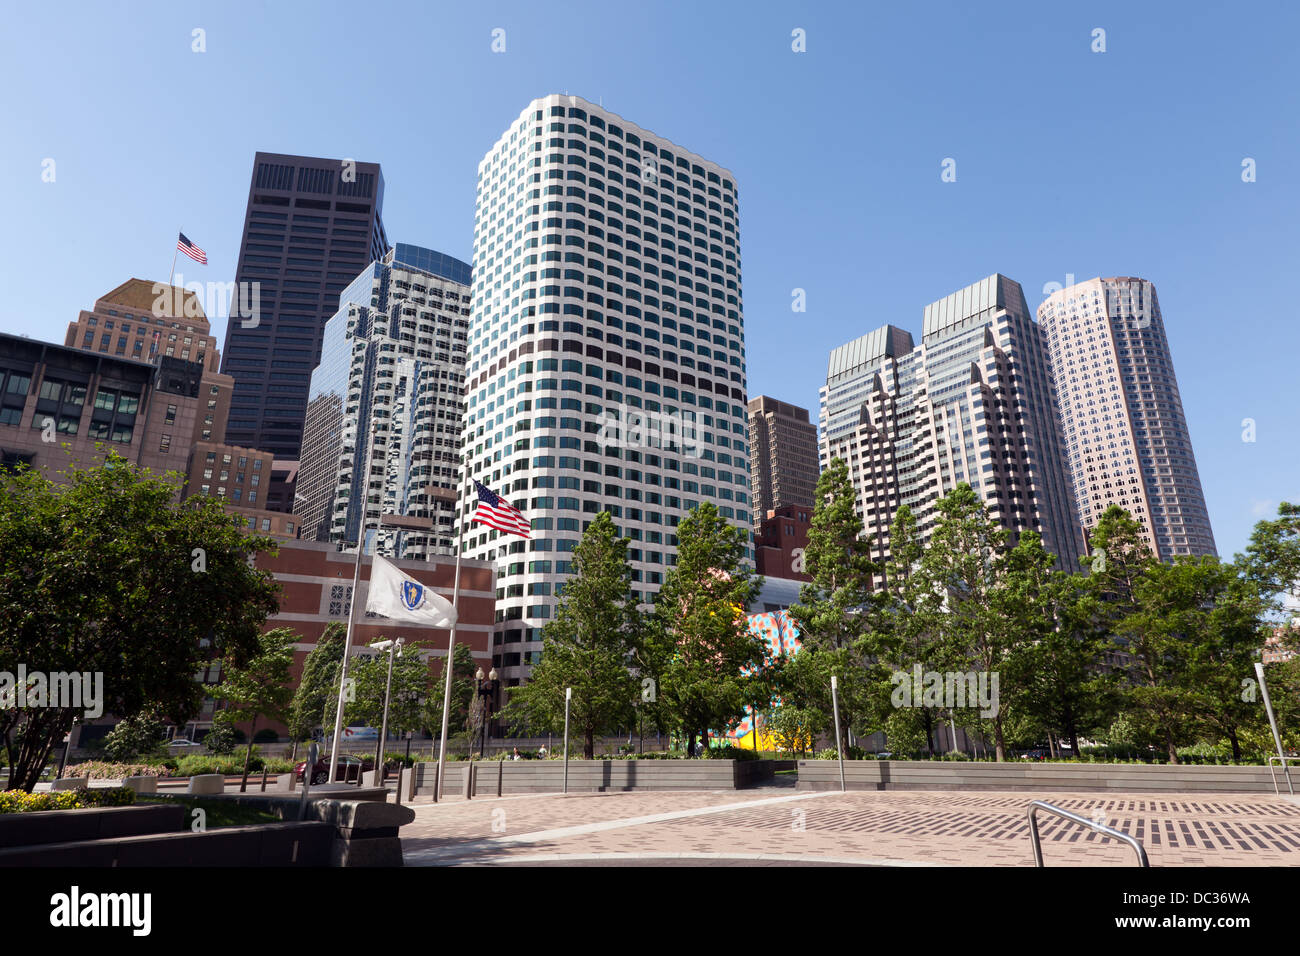 Dewey Square Park, Rose Kennedy Greenway, Boston. Banque D'Images